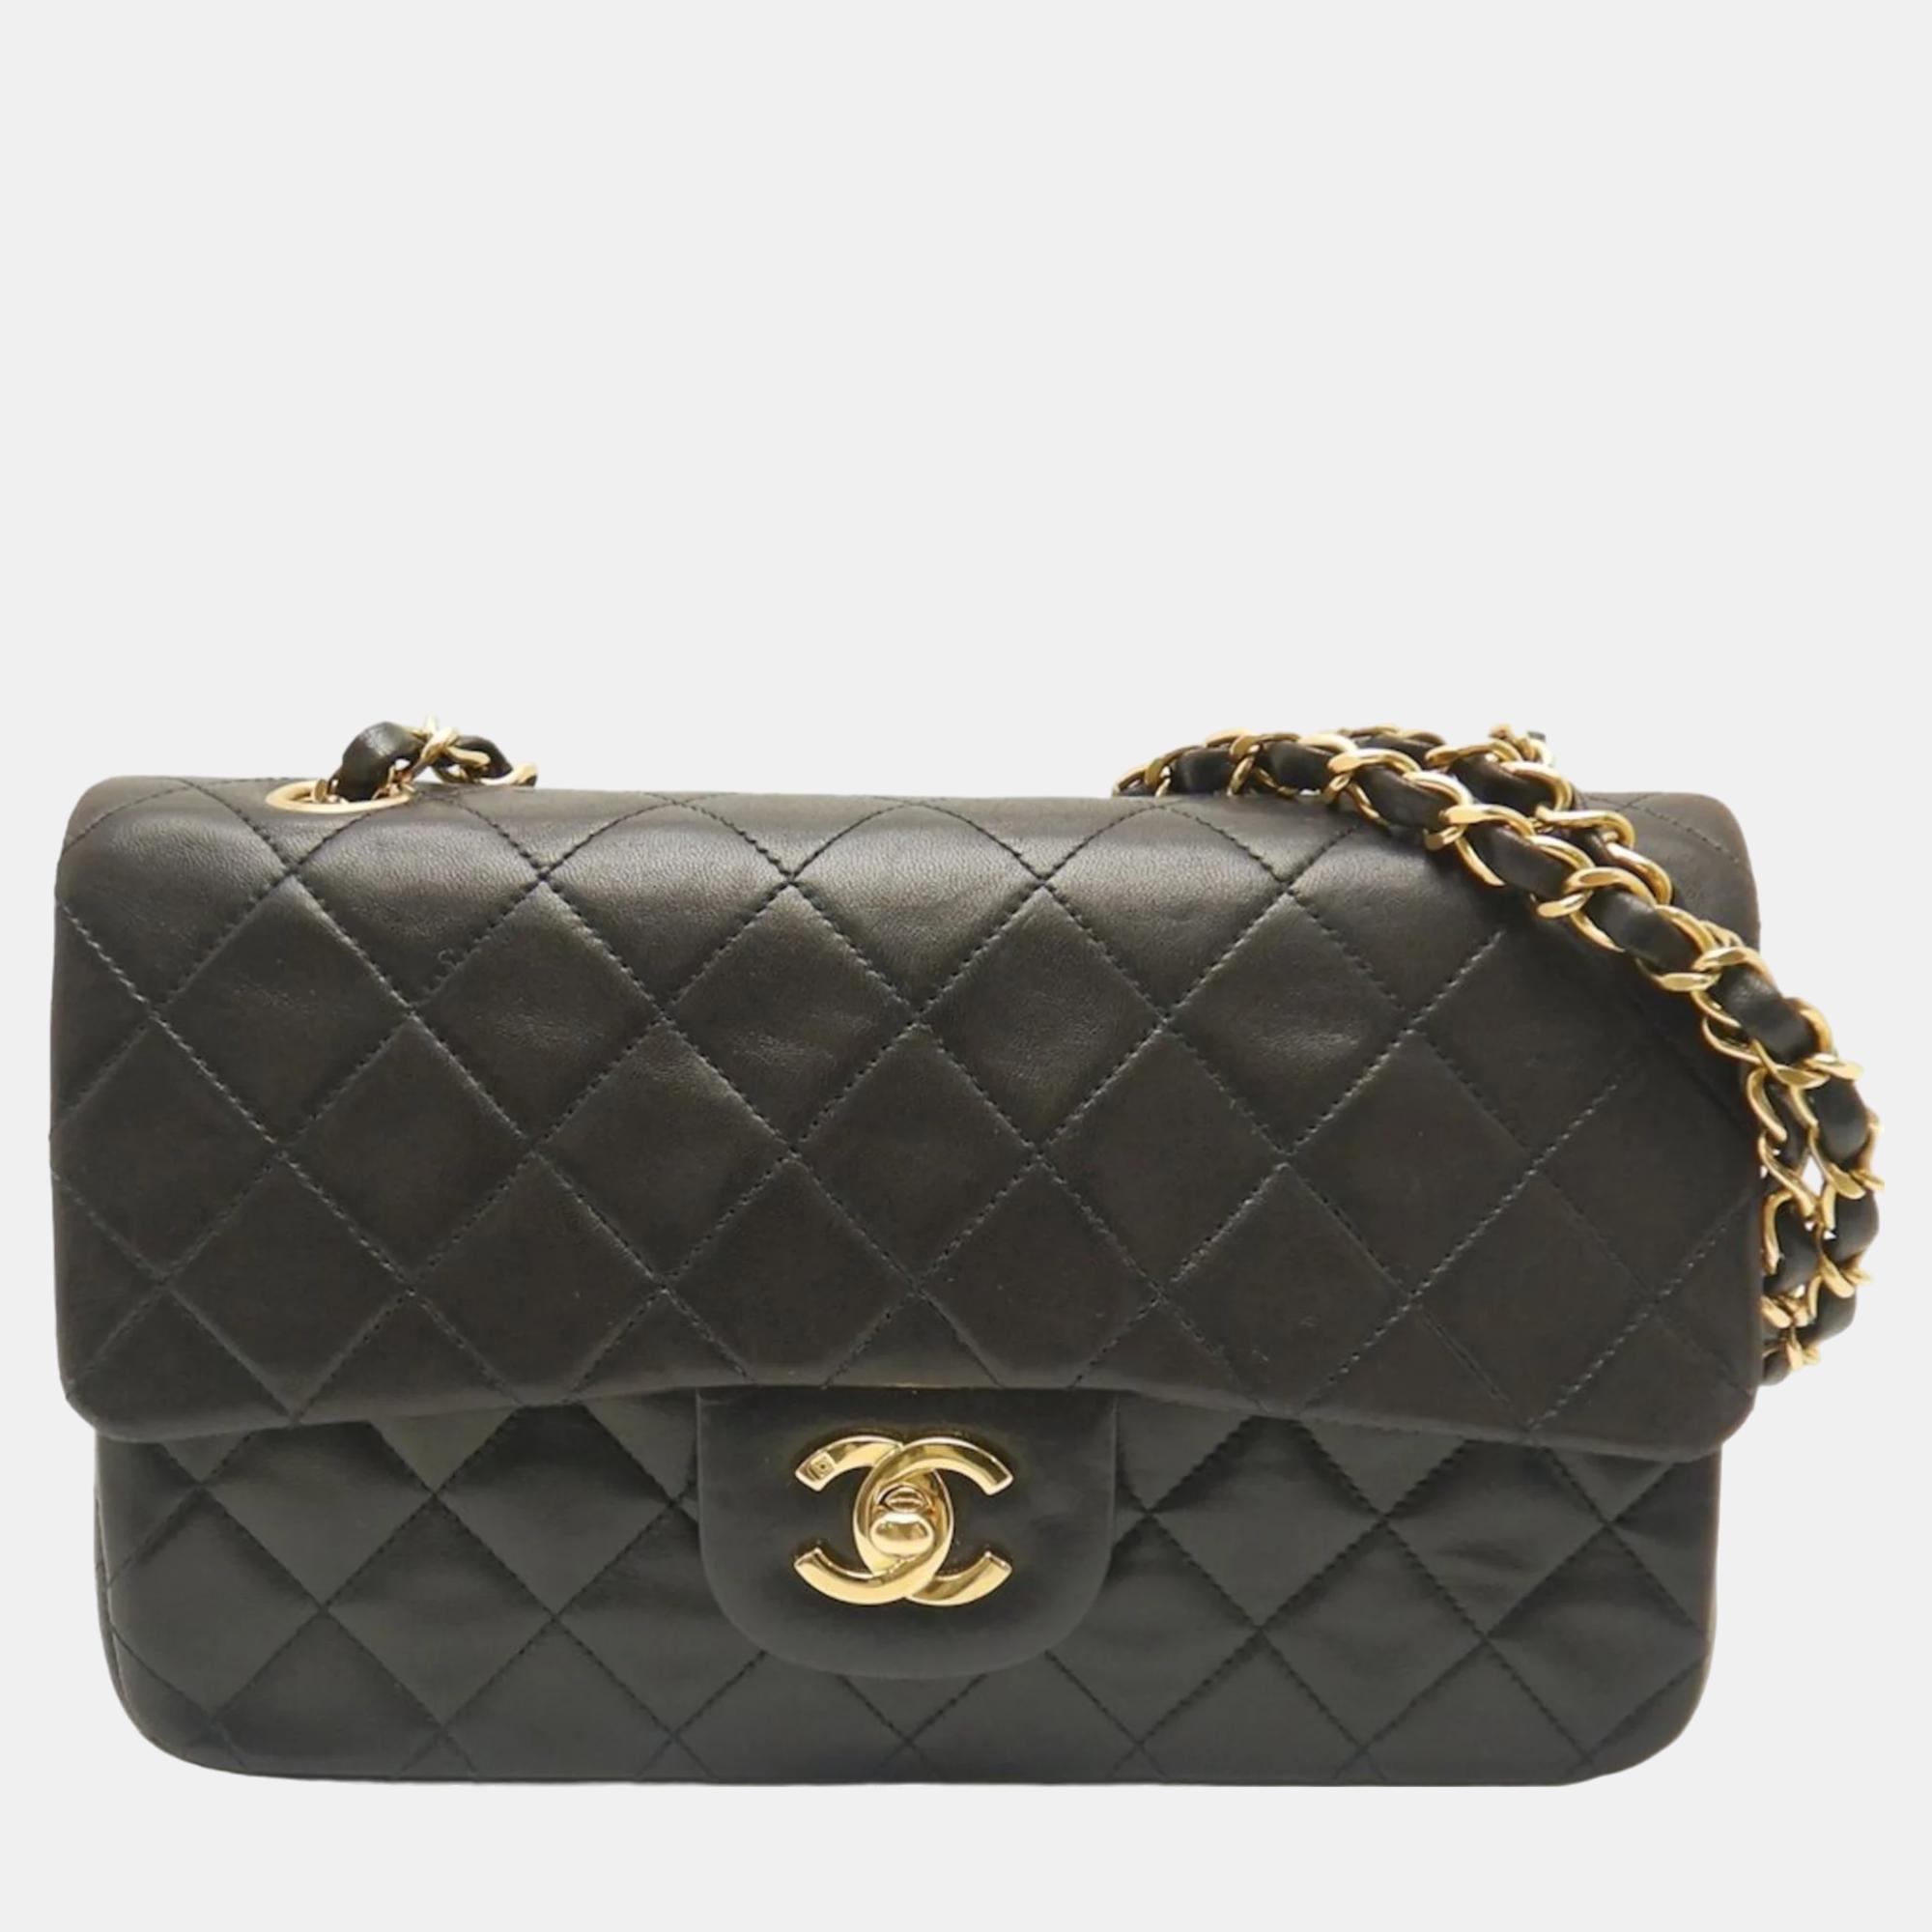 Known for creating exclusive meticulously crafted instantly recognizable fashion items Chanel is a brand coveted around the world. Indulge in the Chanel way of luxury with this pretty bag.